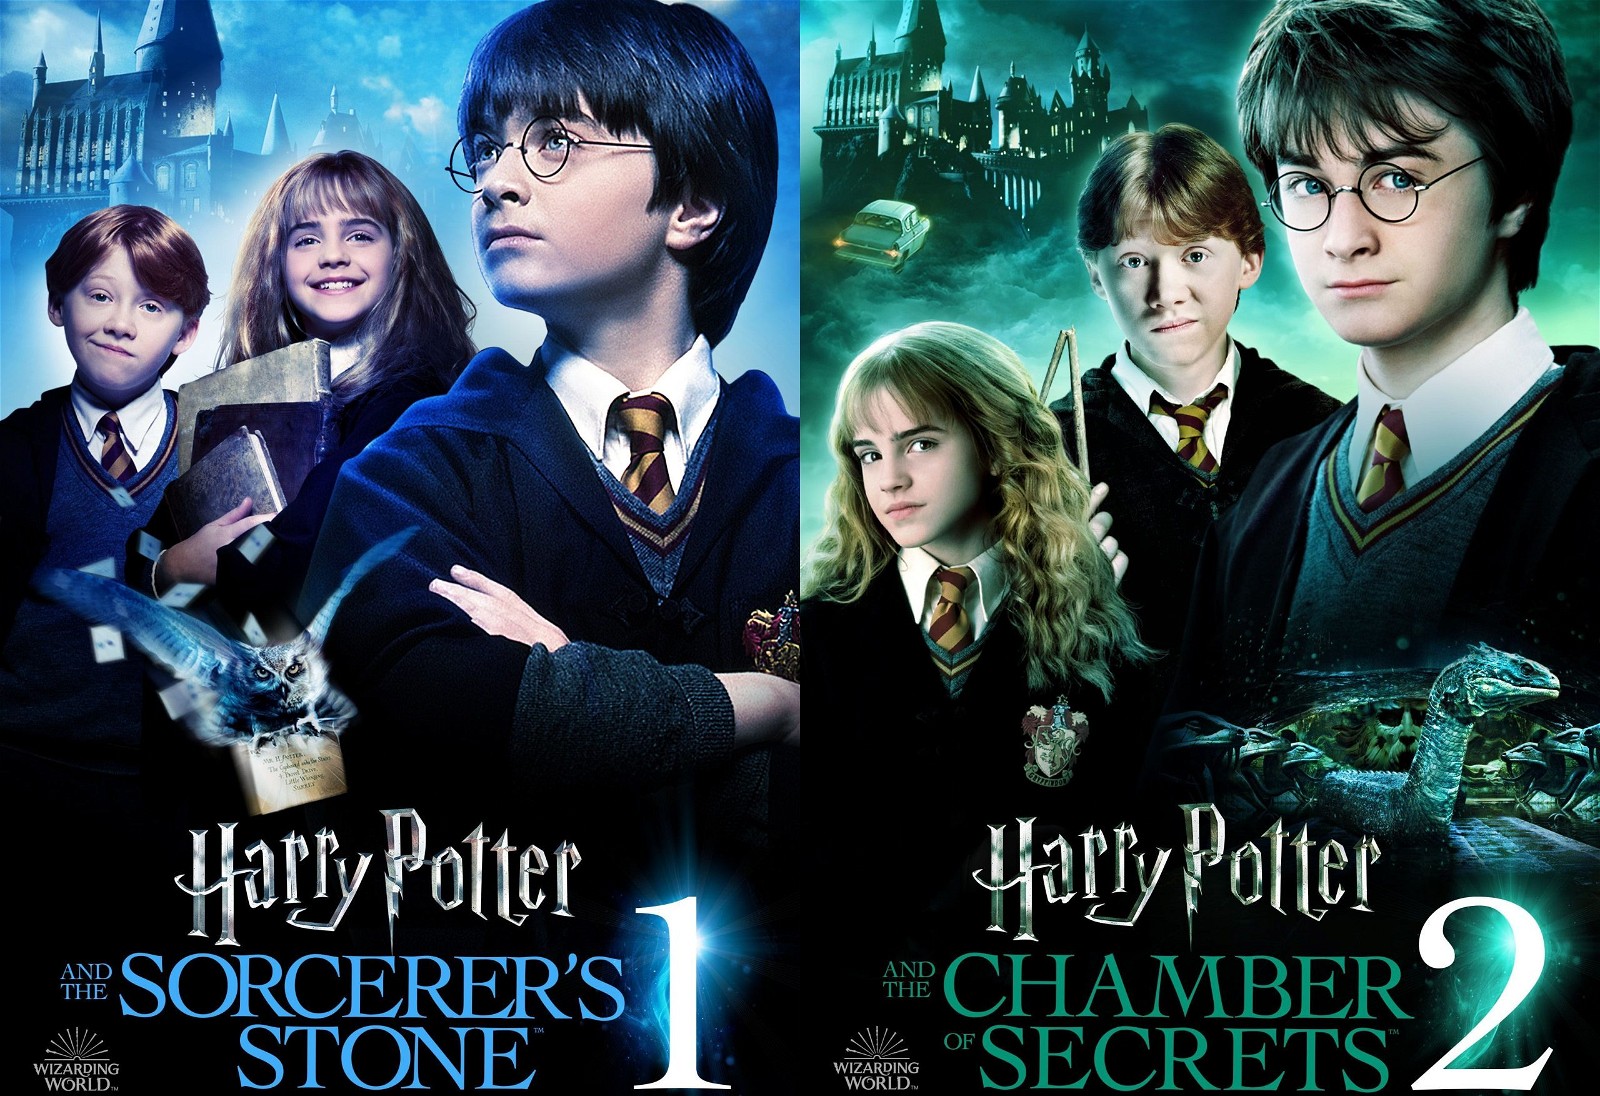 The two HP films directed by Chris Columbus